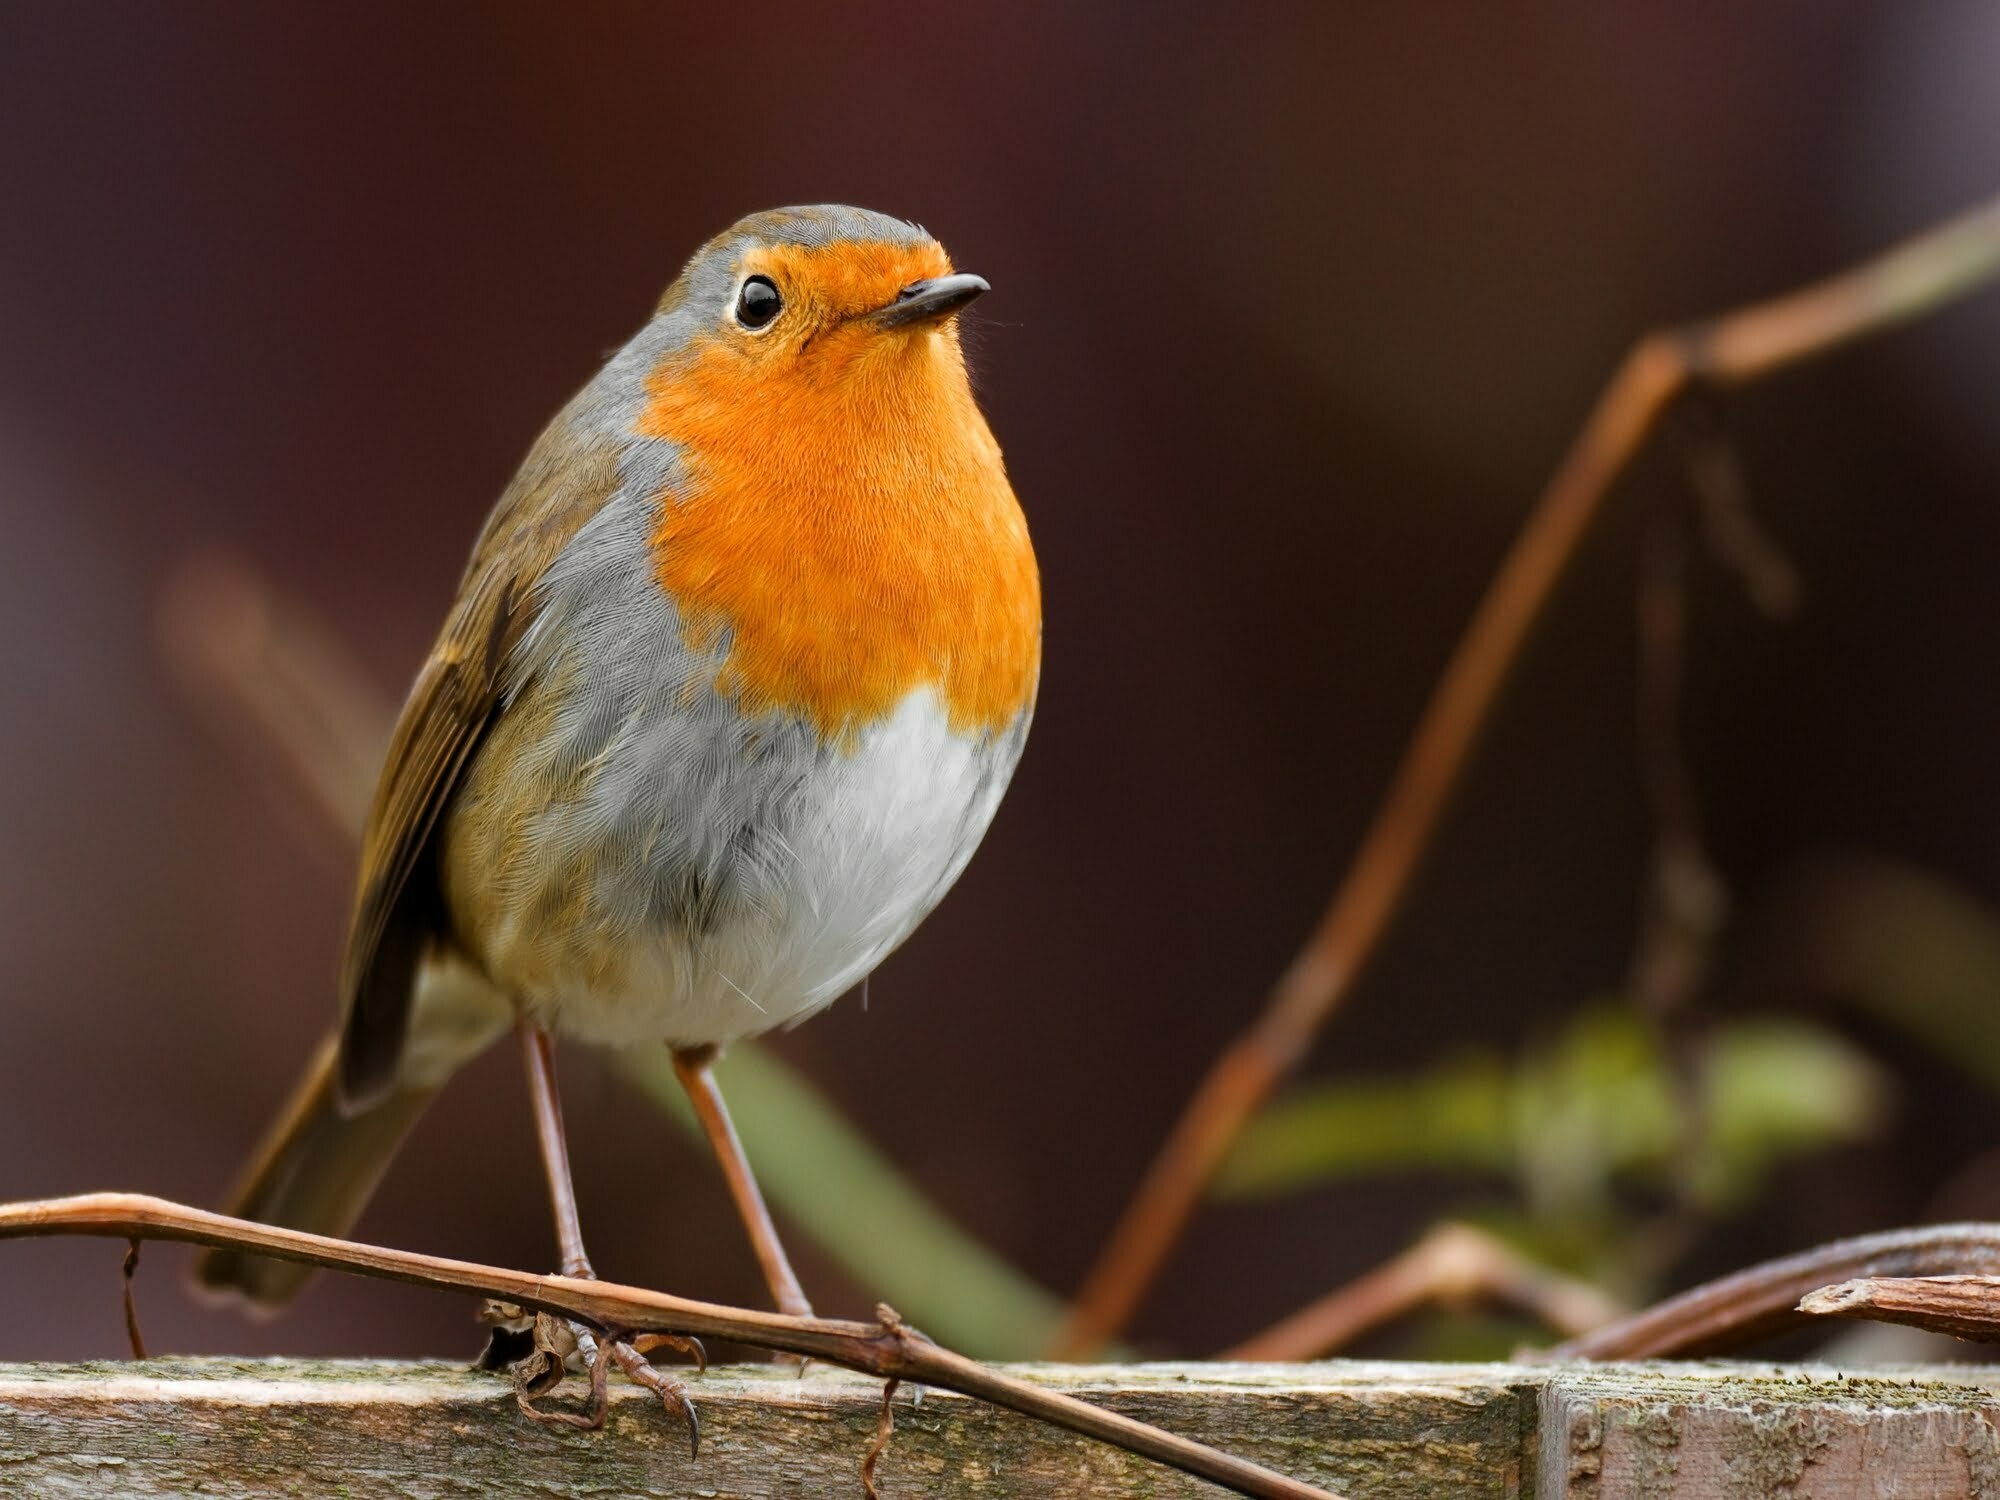 Many facts about robins